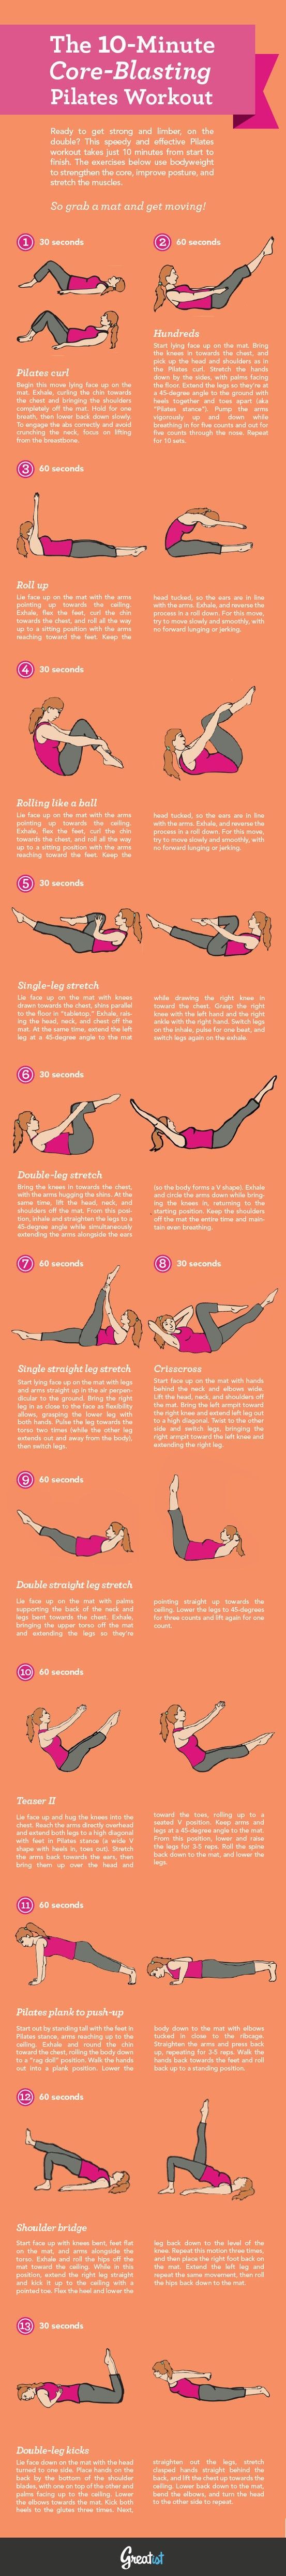 The 10-Minute Core-Blasting Pilates Workout [Infographic] This looks like what I have done following Mari Winsdor, and it really